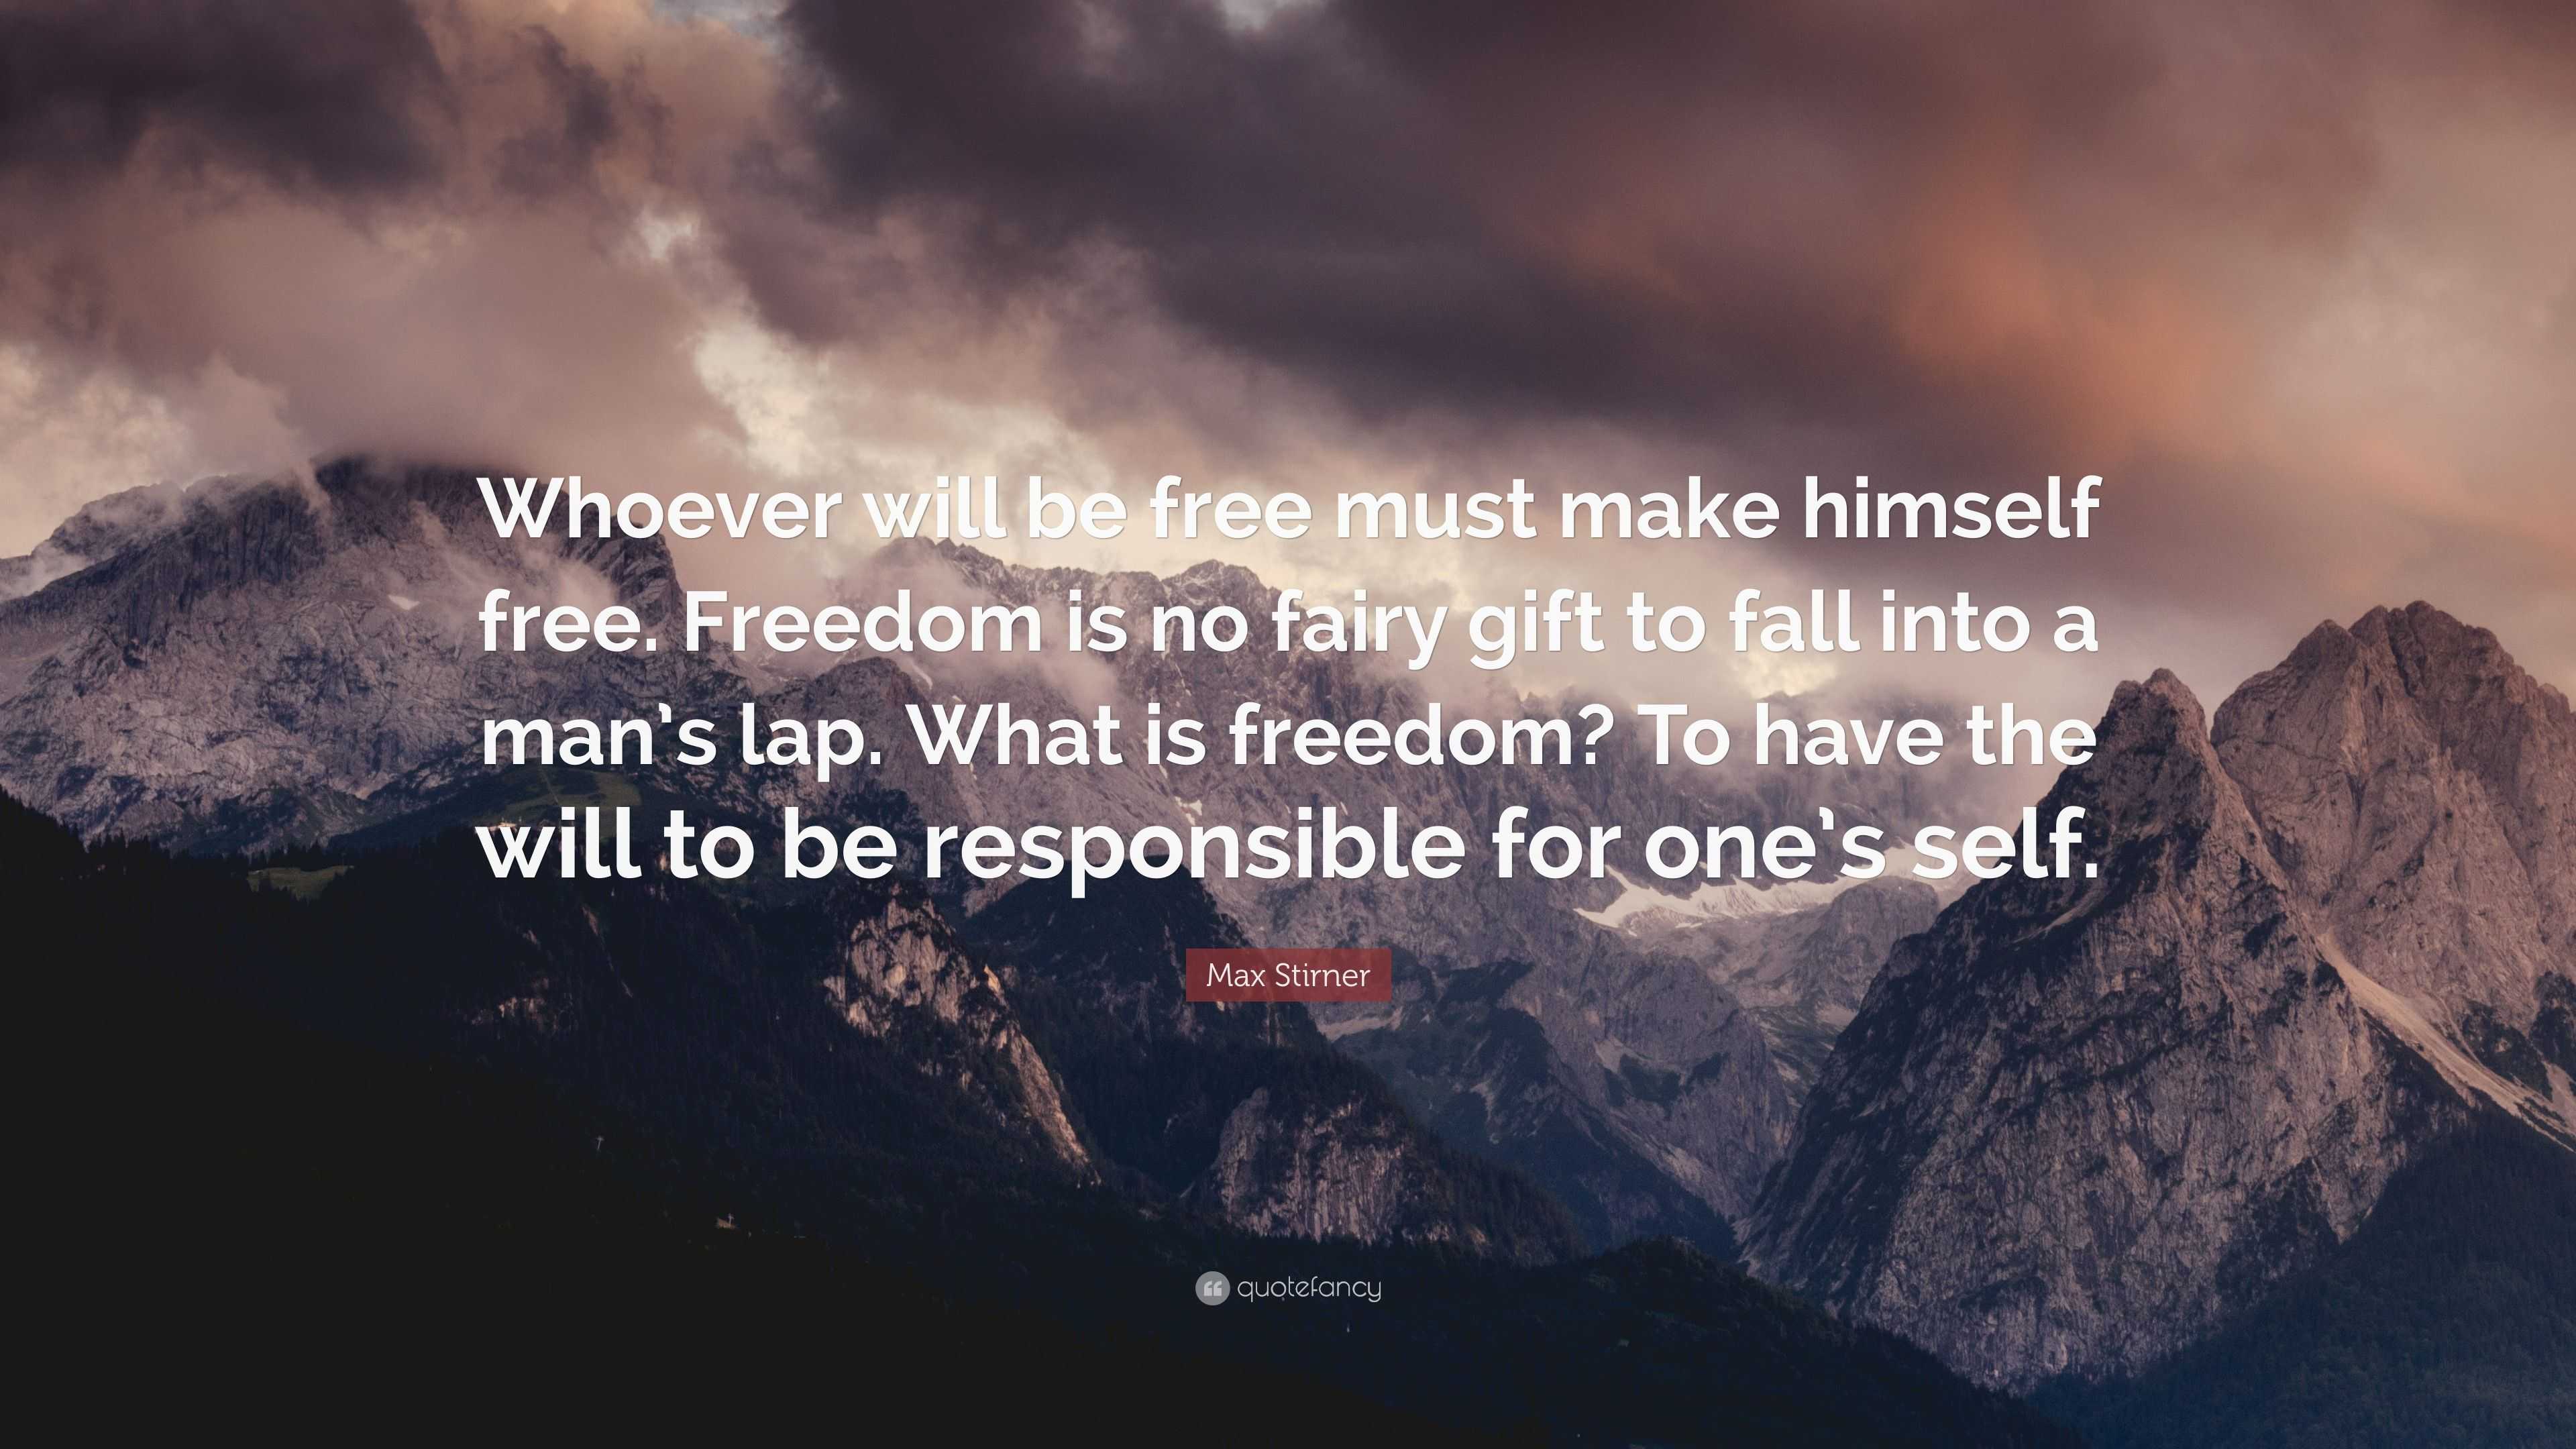 Max Stirner Quote: “Whoever will be free must make himself free ...